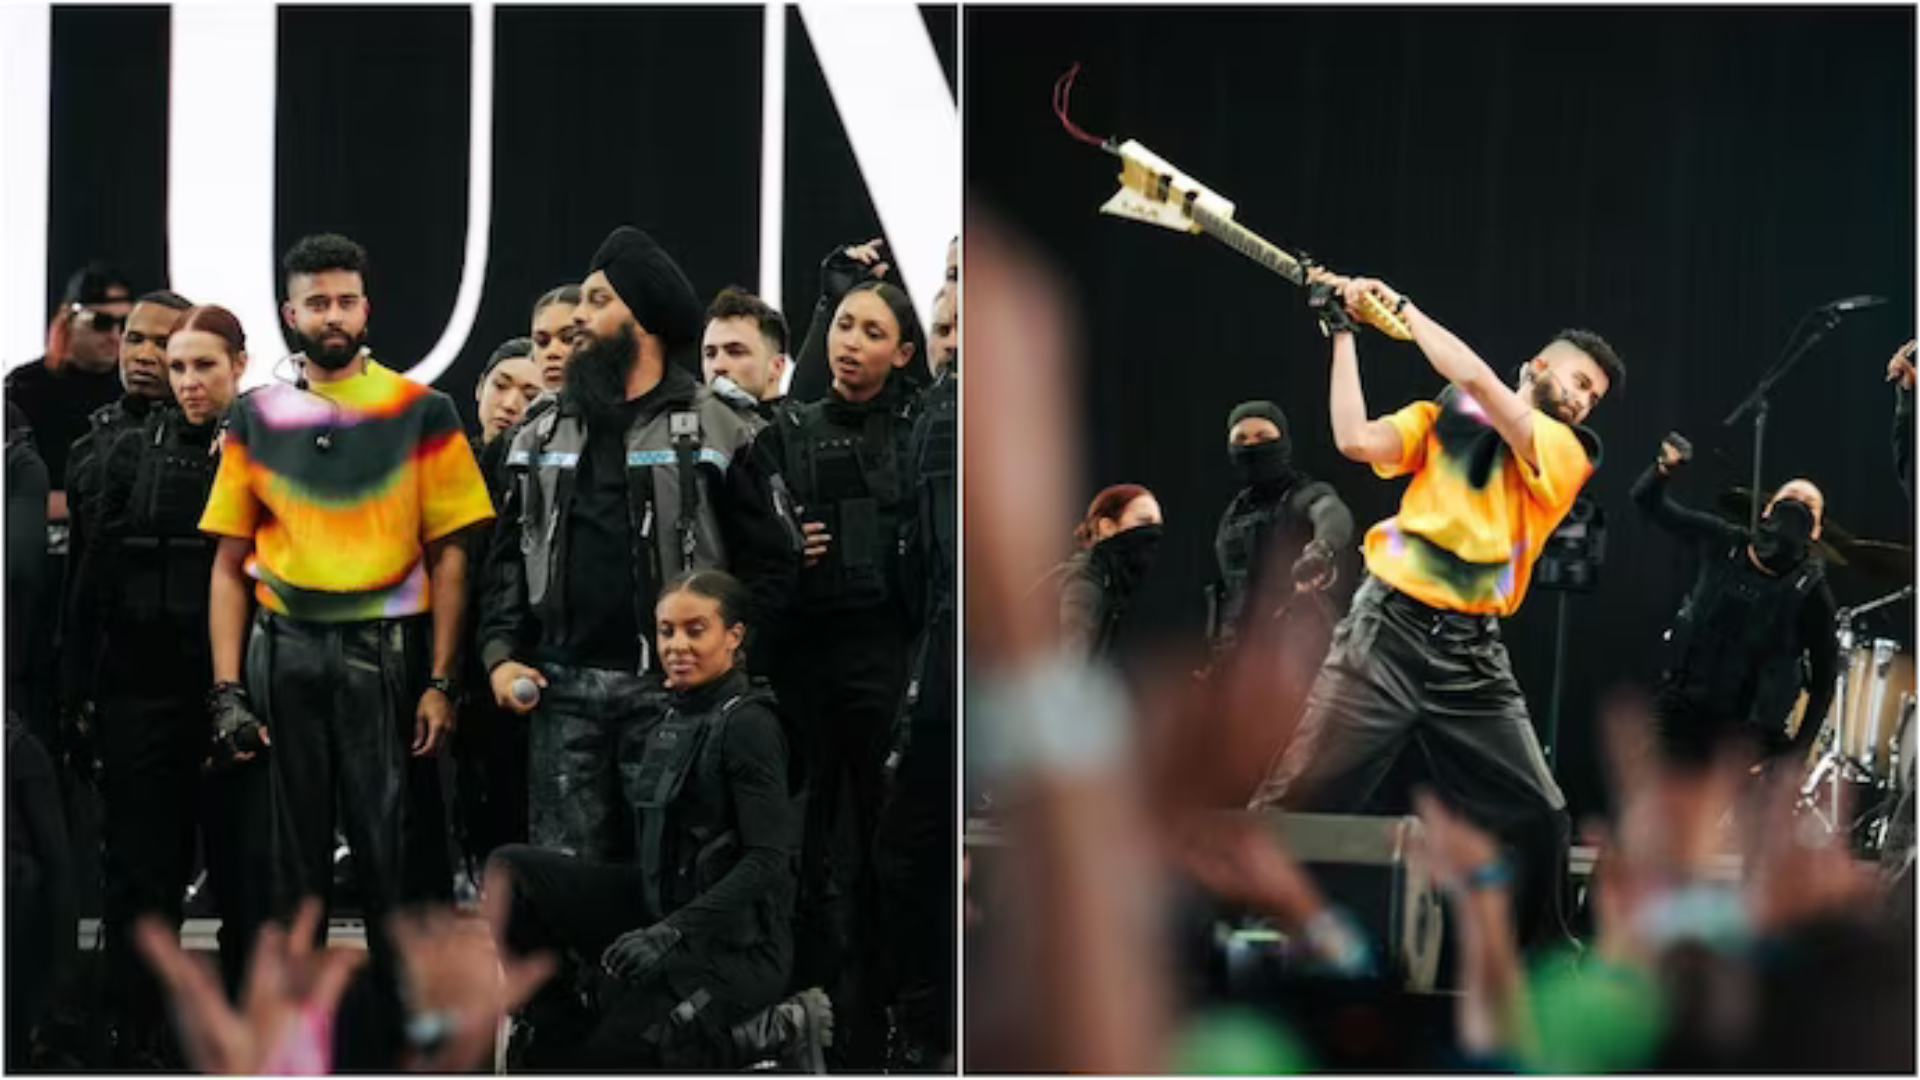 AP Dhillon Sparks Controversy for Smashing Guitar at Coachella Performance